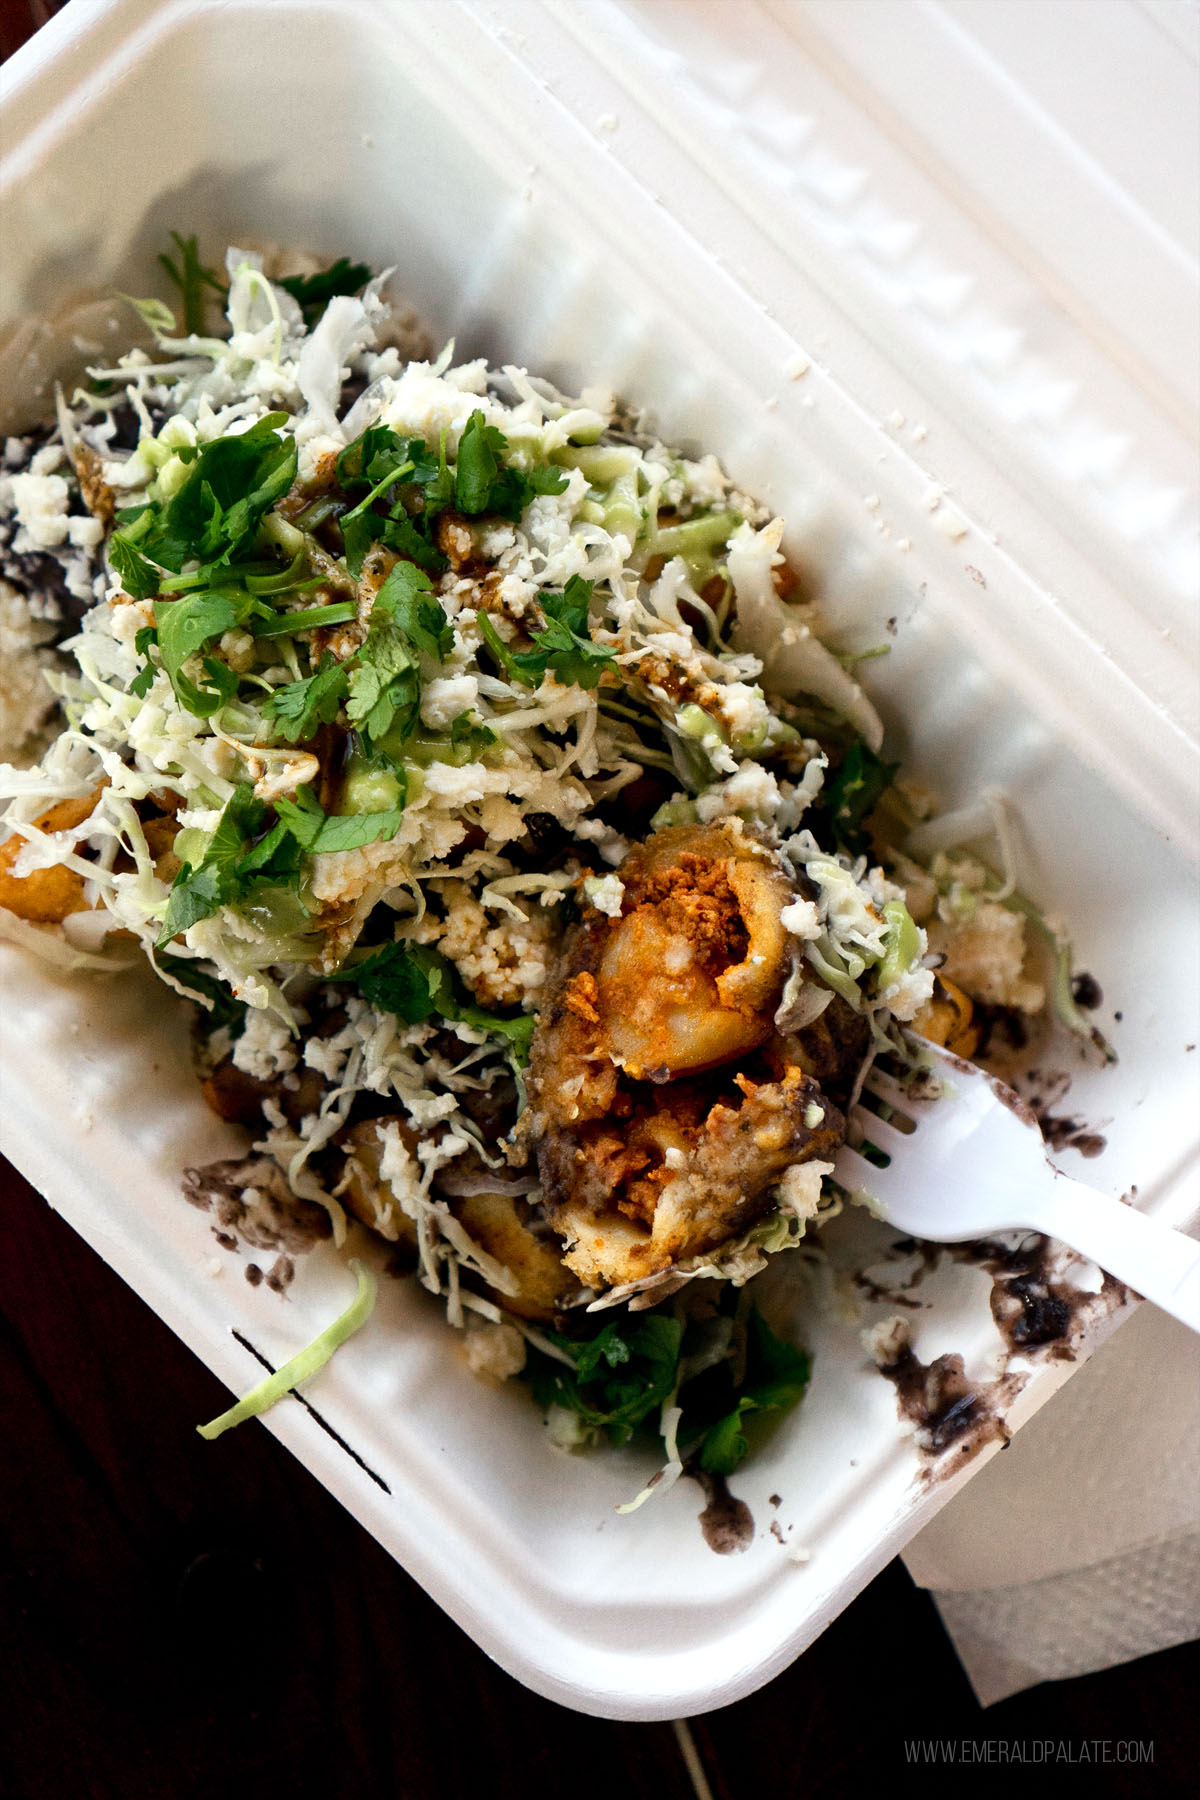 Mexican food in a takeout container from a Eugene, OR restaurant